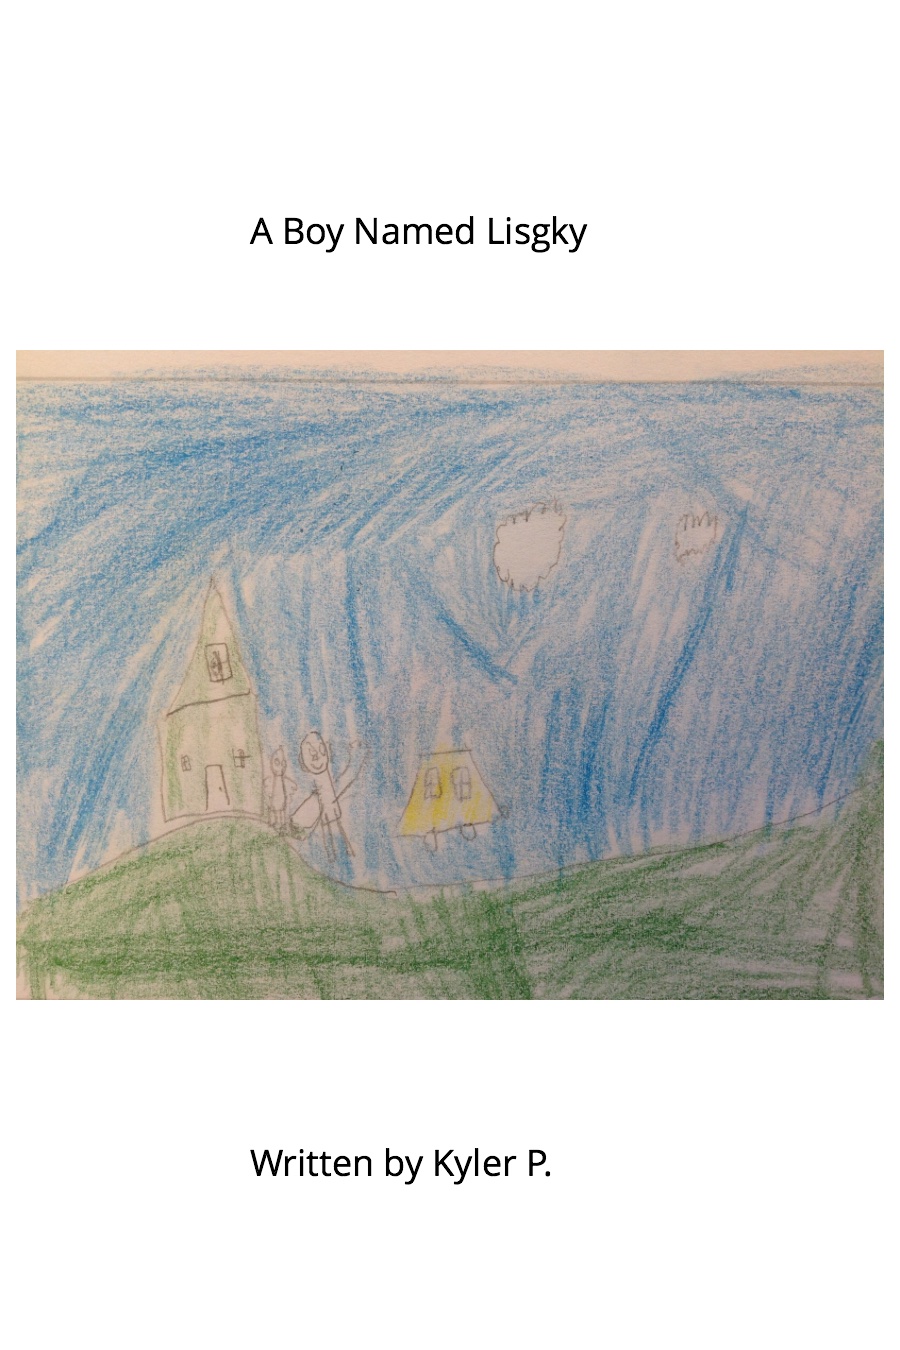 A Boy Named Lisgky by Kyler P